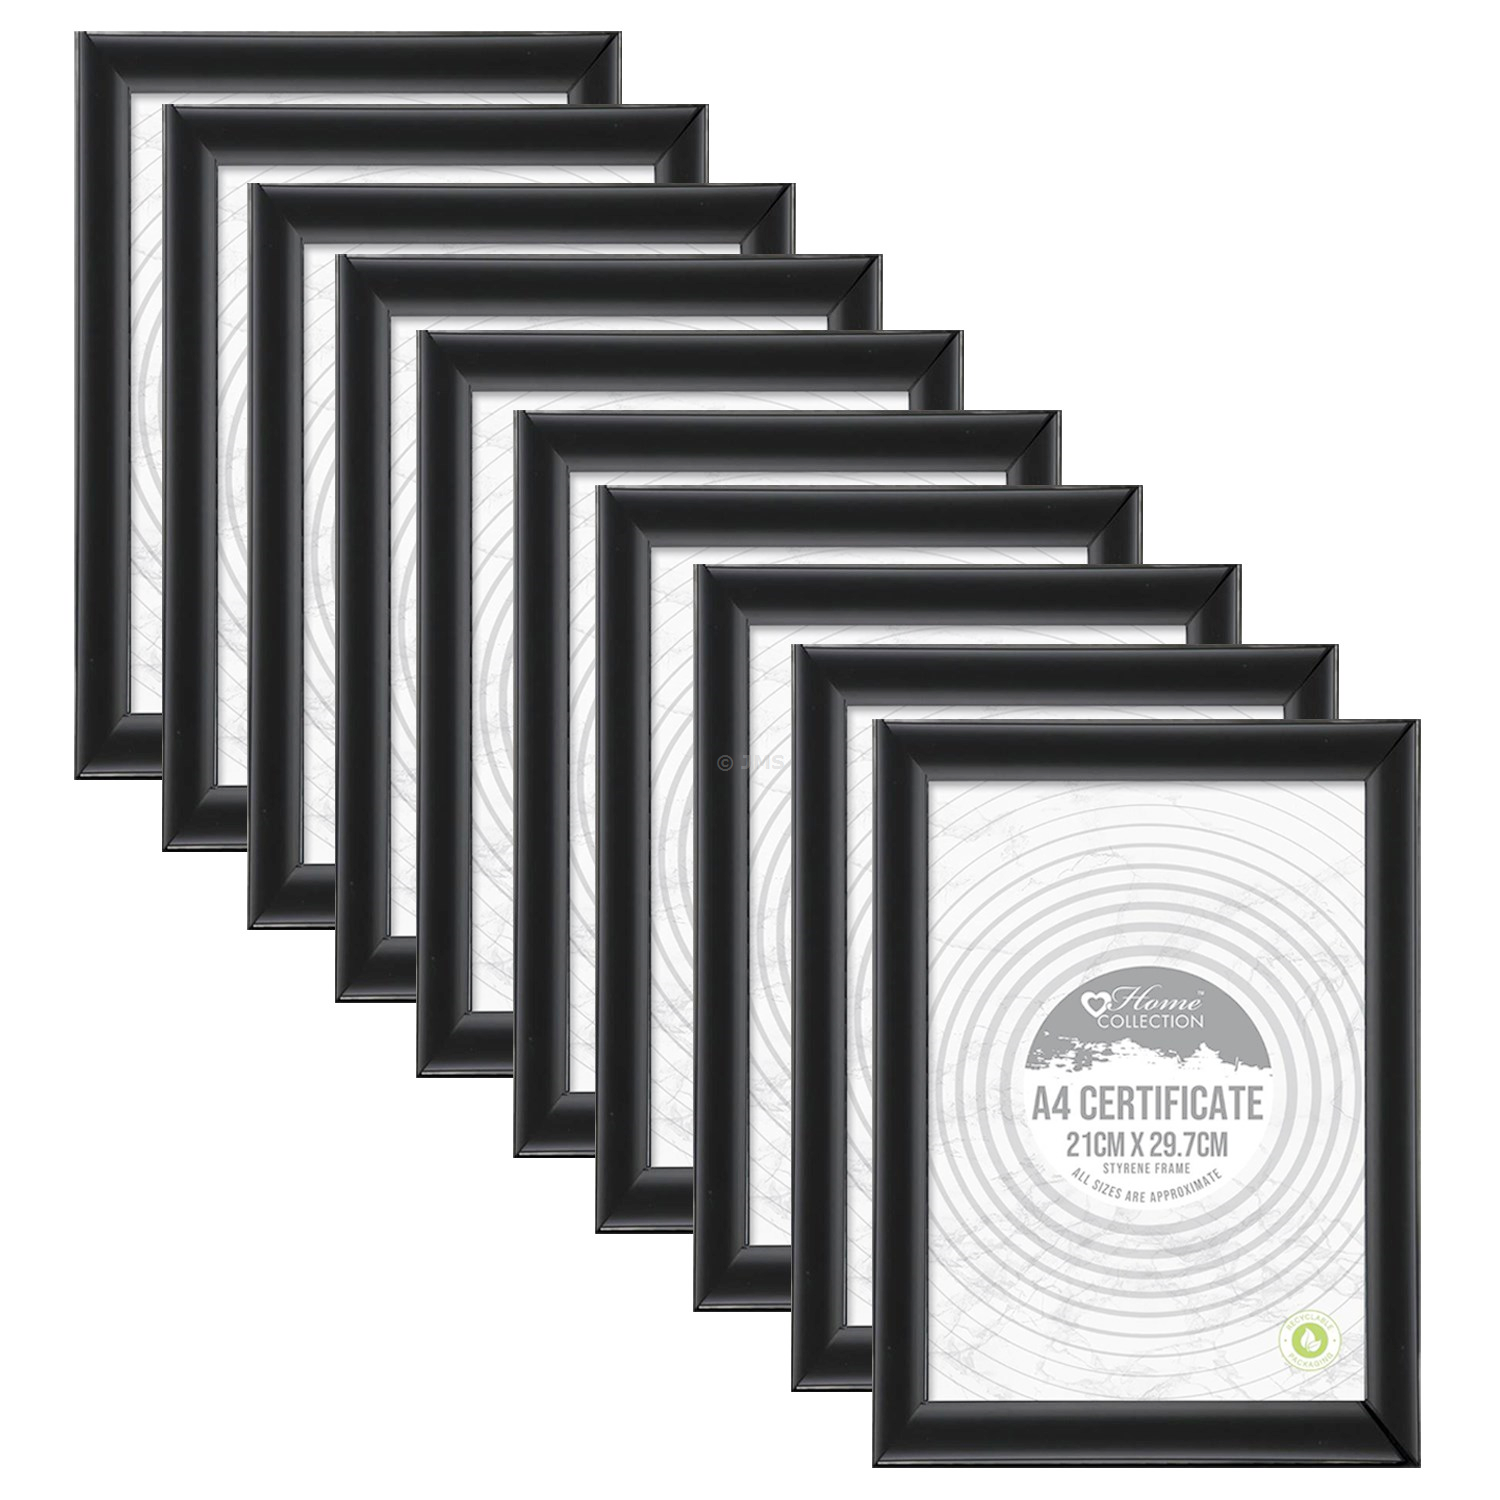 [Set of 10] Black Styrene Photo Picture Frame A4 (21 x 29.7cm) Certificate Frames Wall Mountable Poster Art